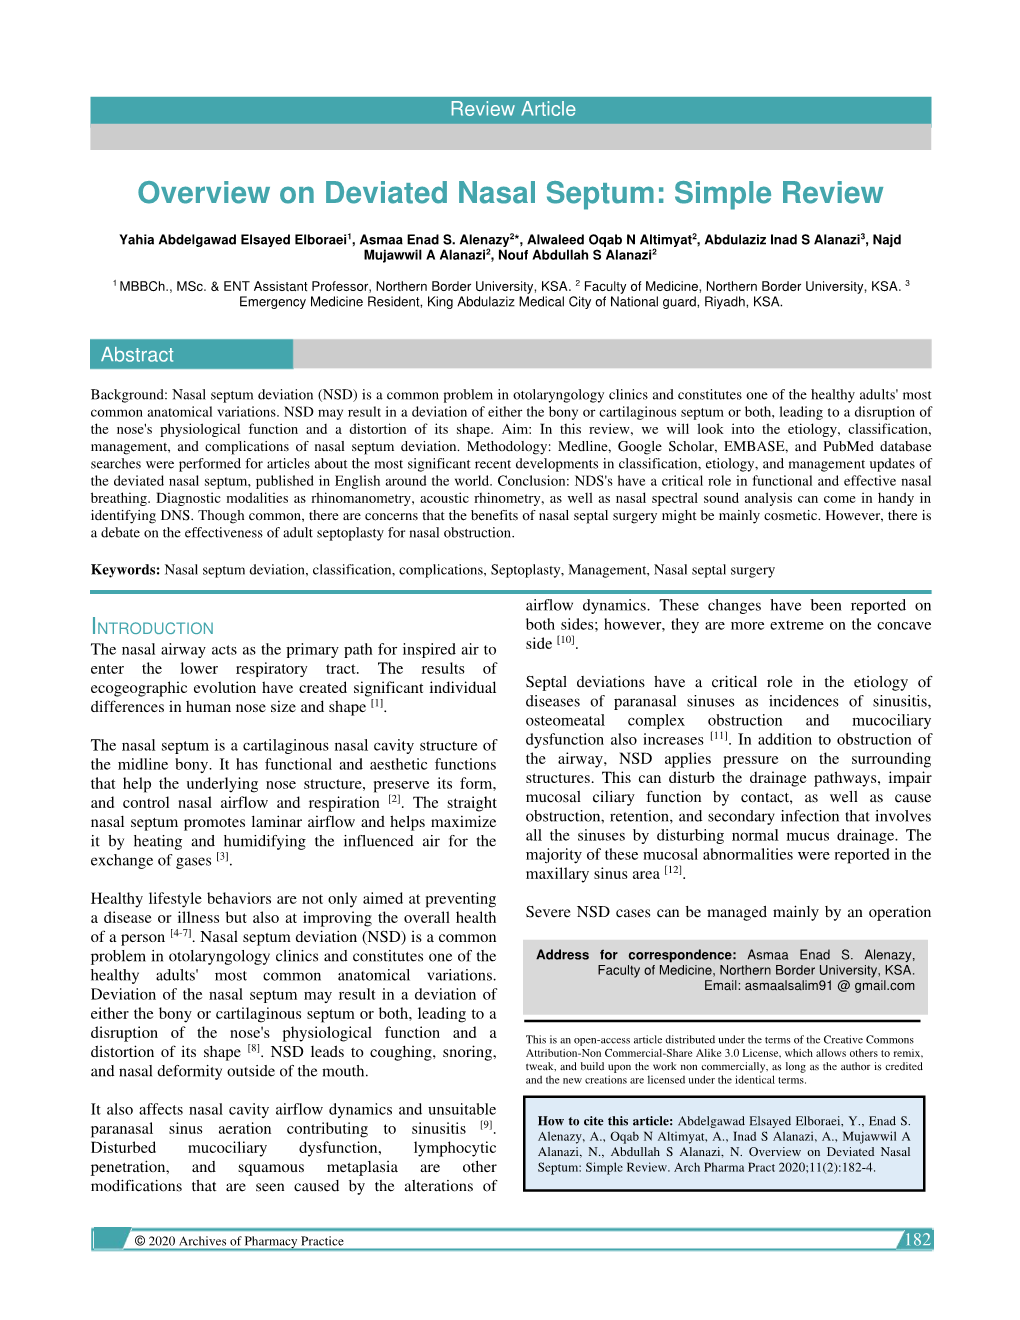 Overview on Deviated Nasal Septum: Simple Review